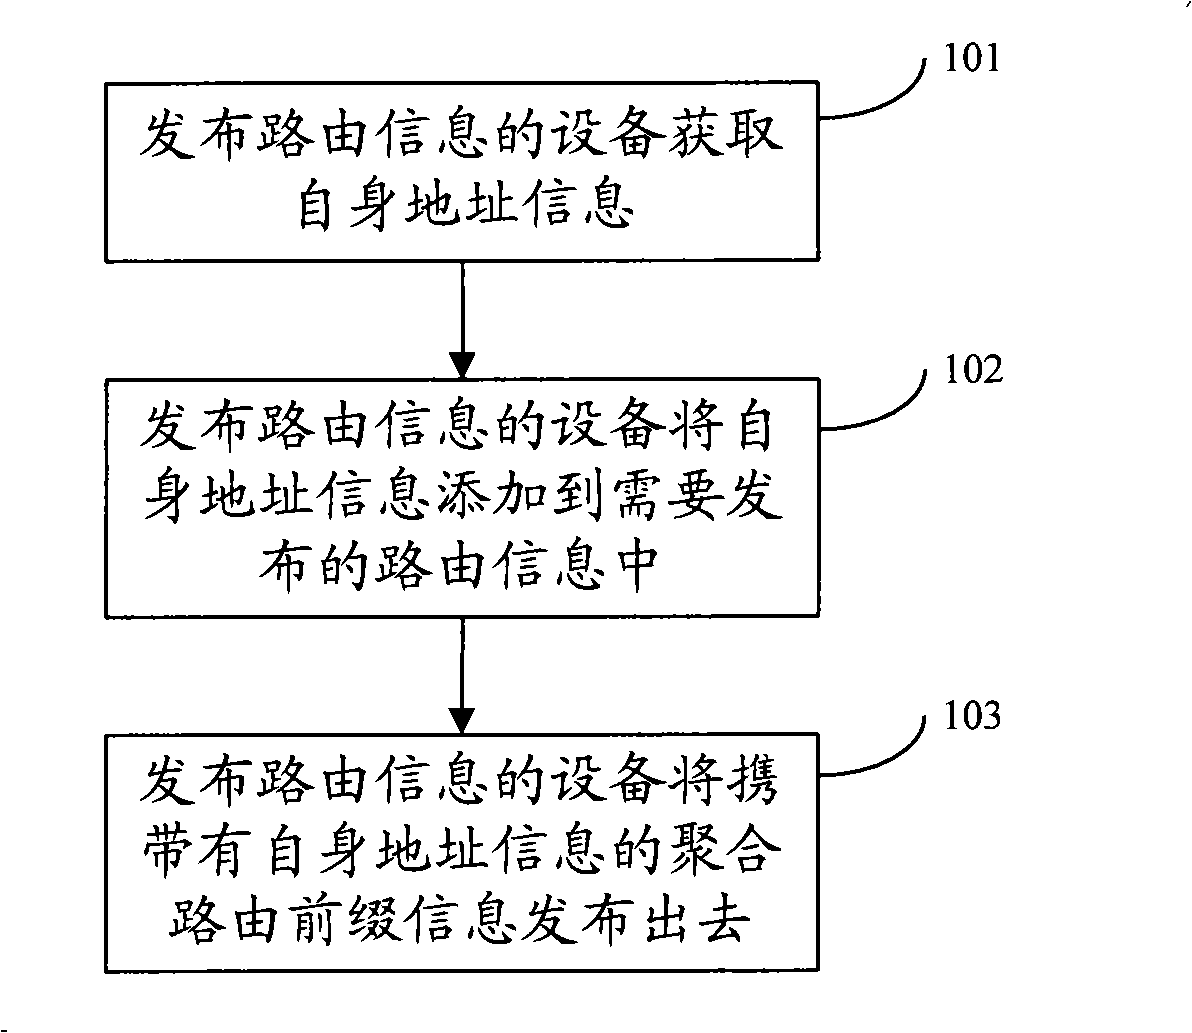 Route information publishing method, data packet routing implementing method, system and apparatus